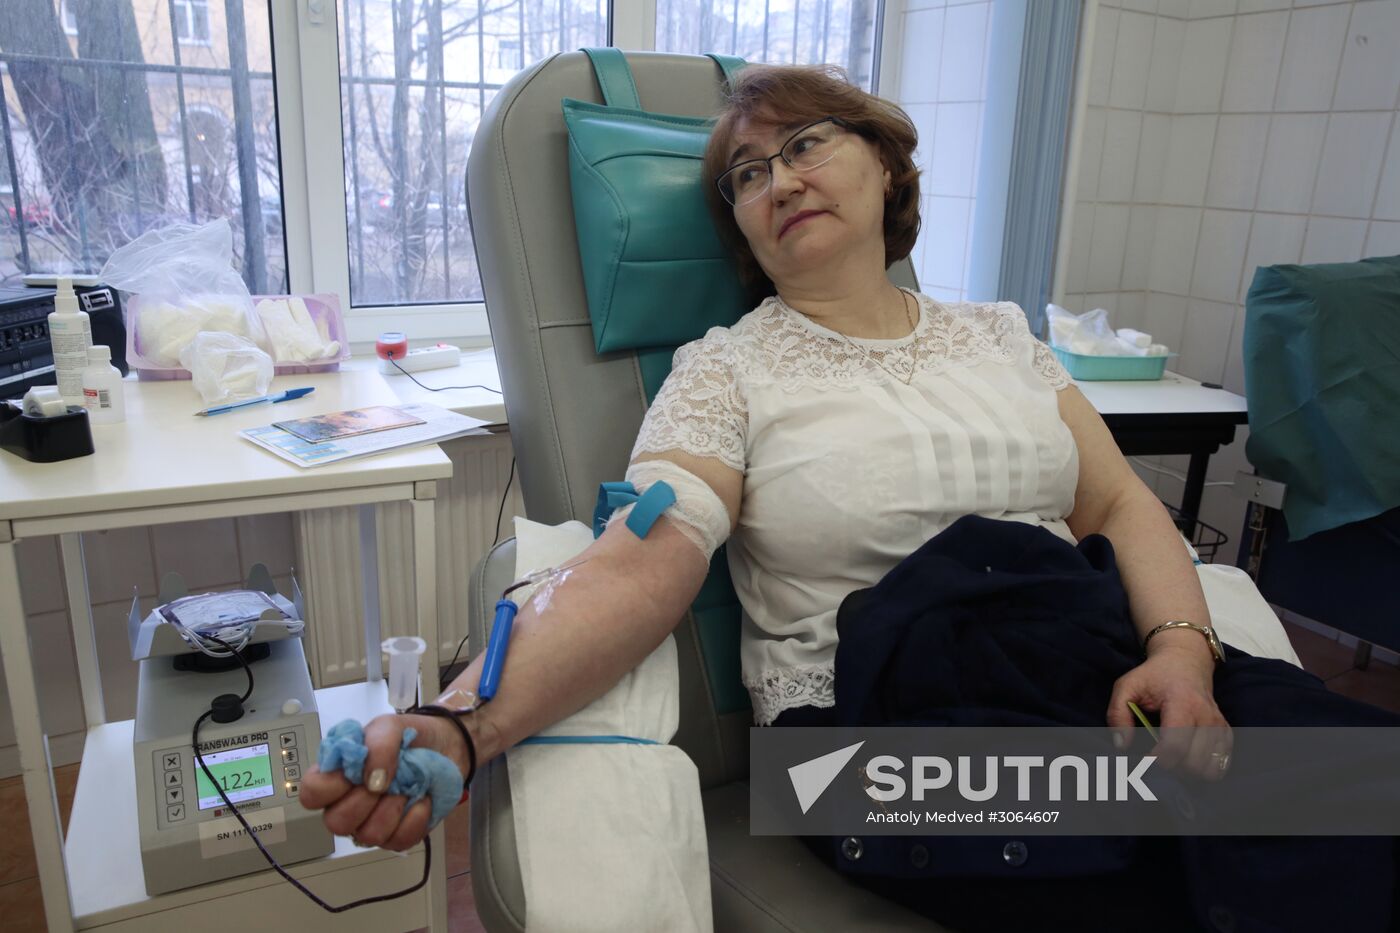 St. Petersburg residents donate blood for metro explosion casualties